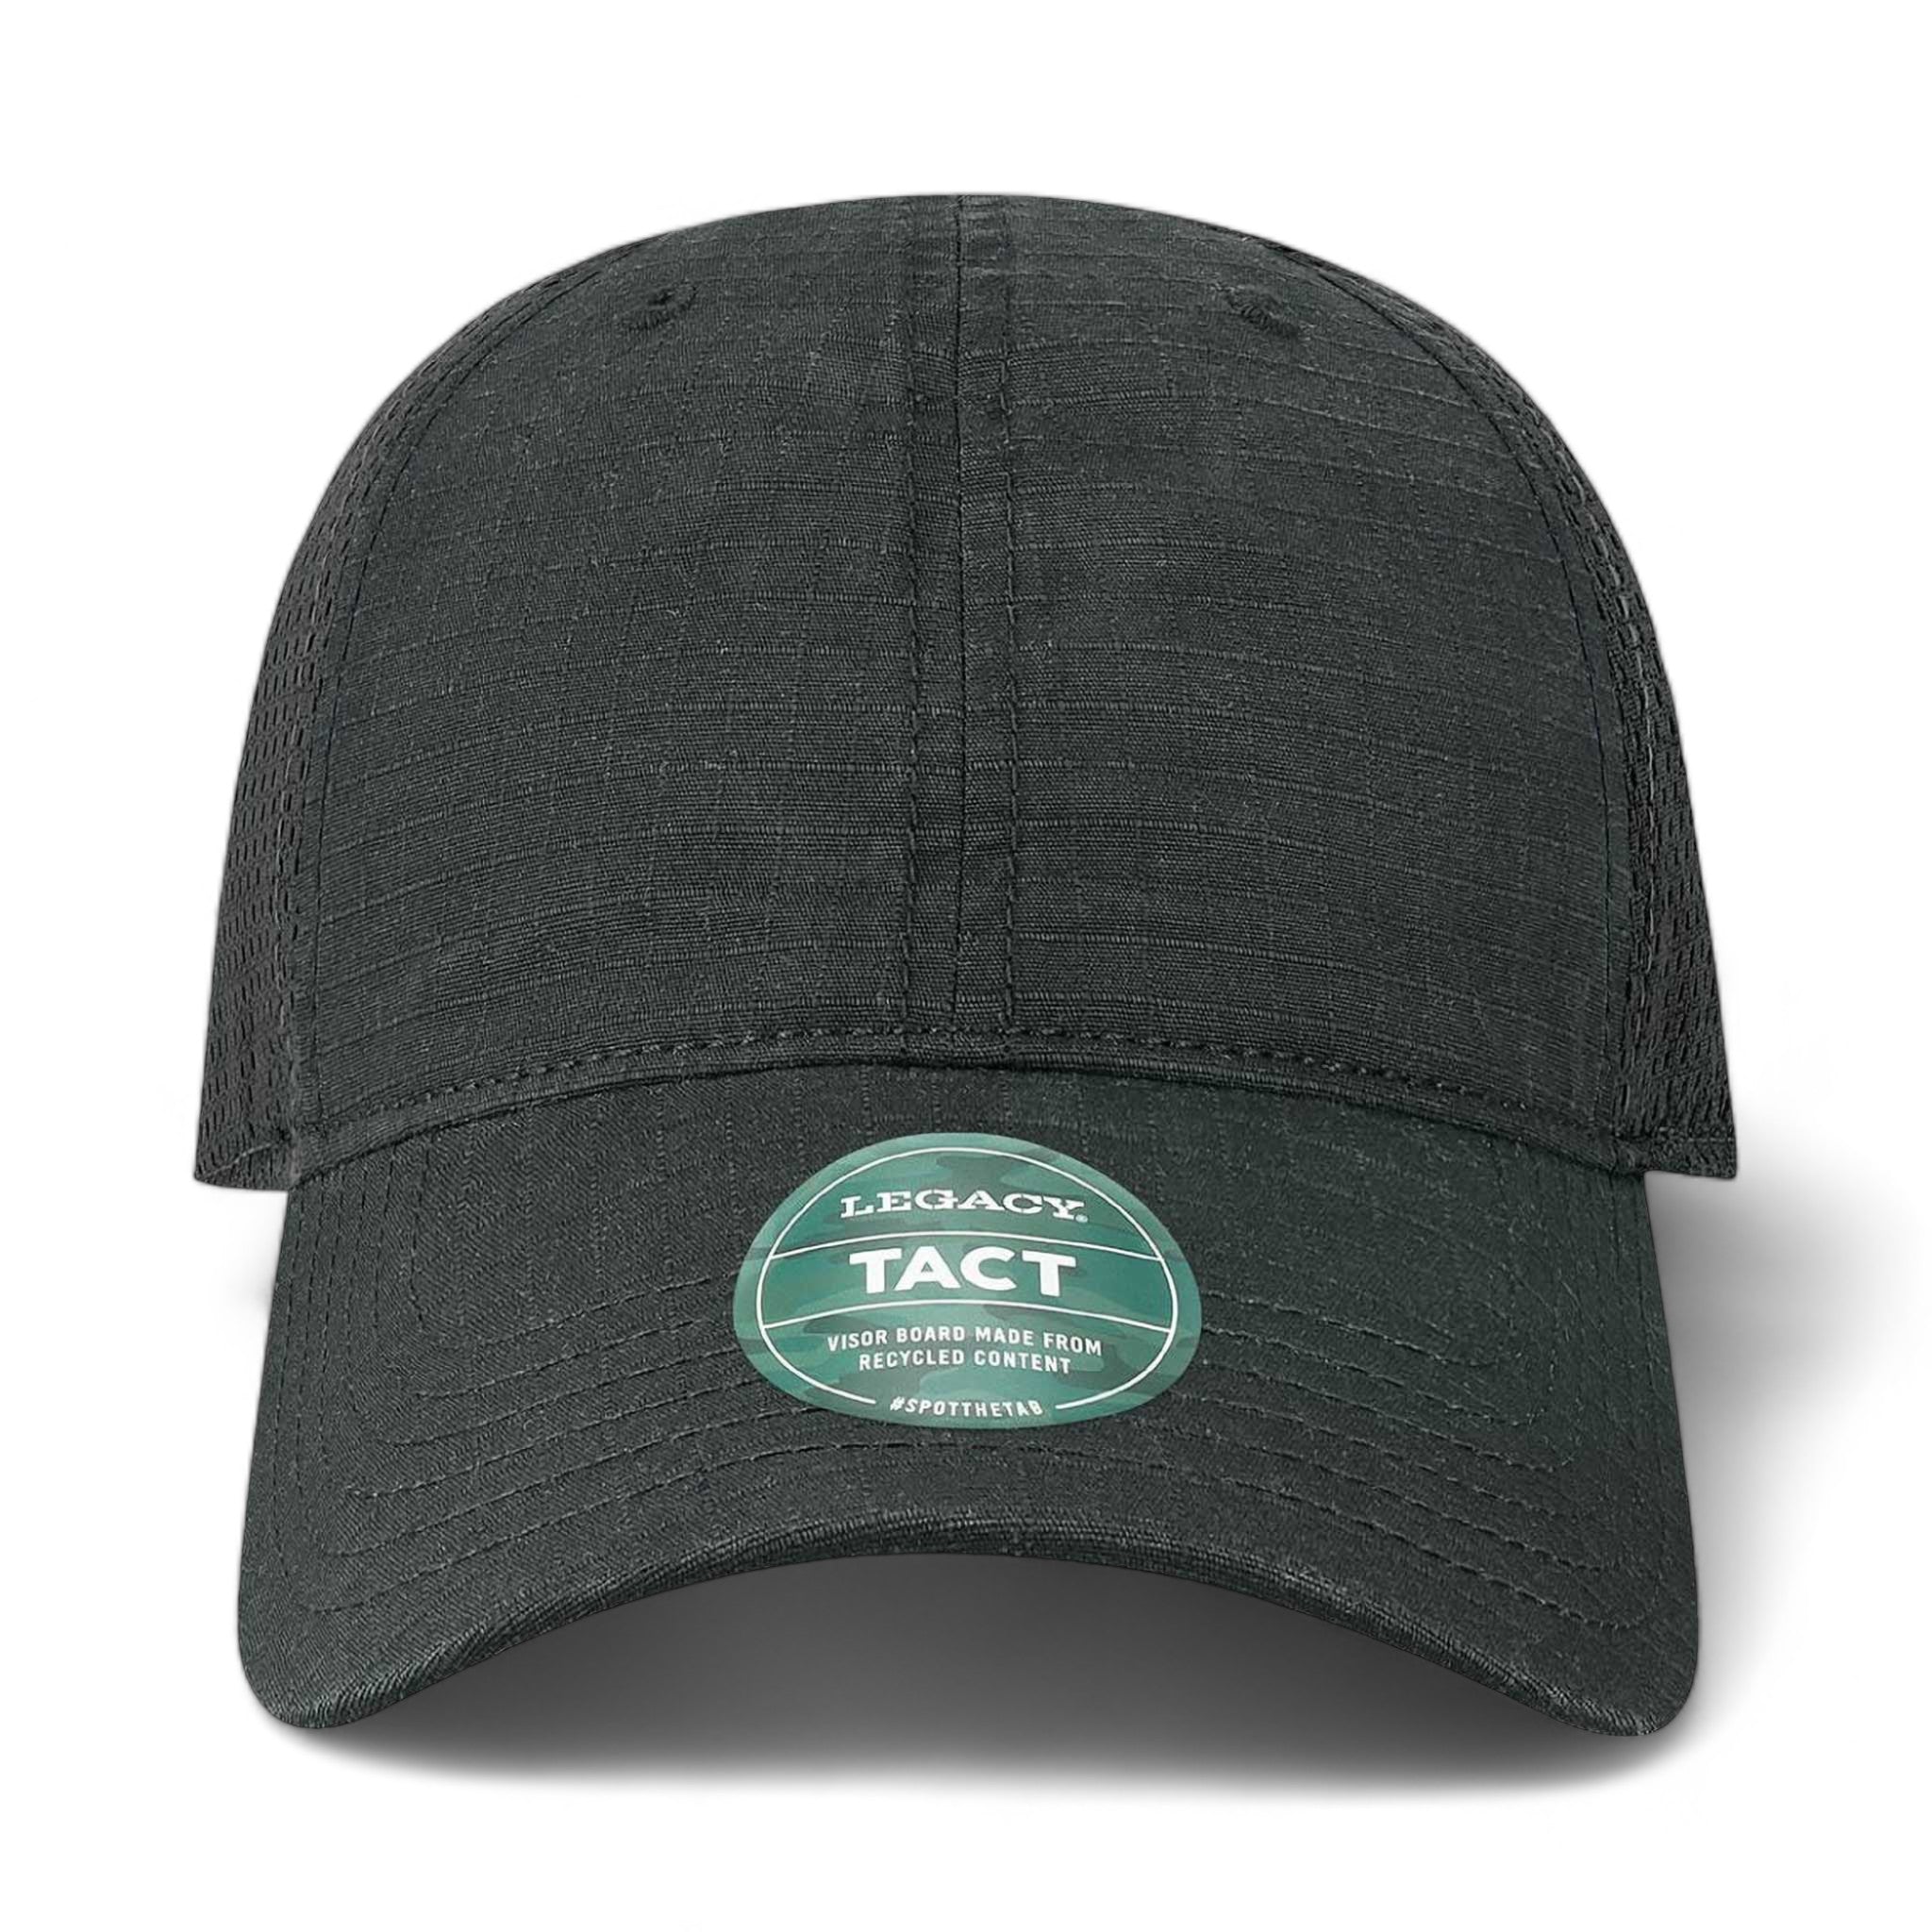 Front view of LEGACY TACT custom hat in black and black